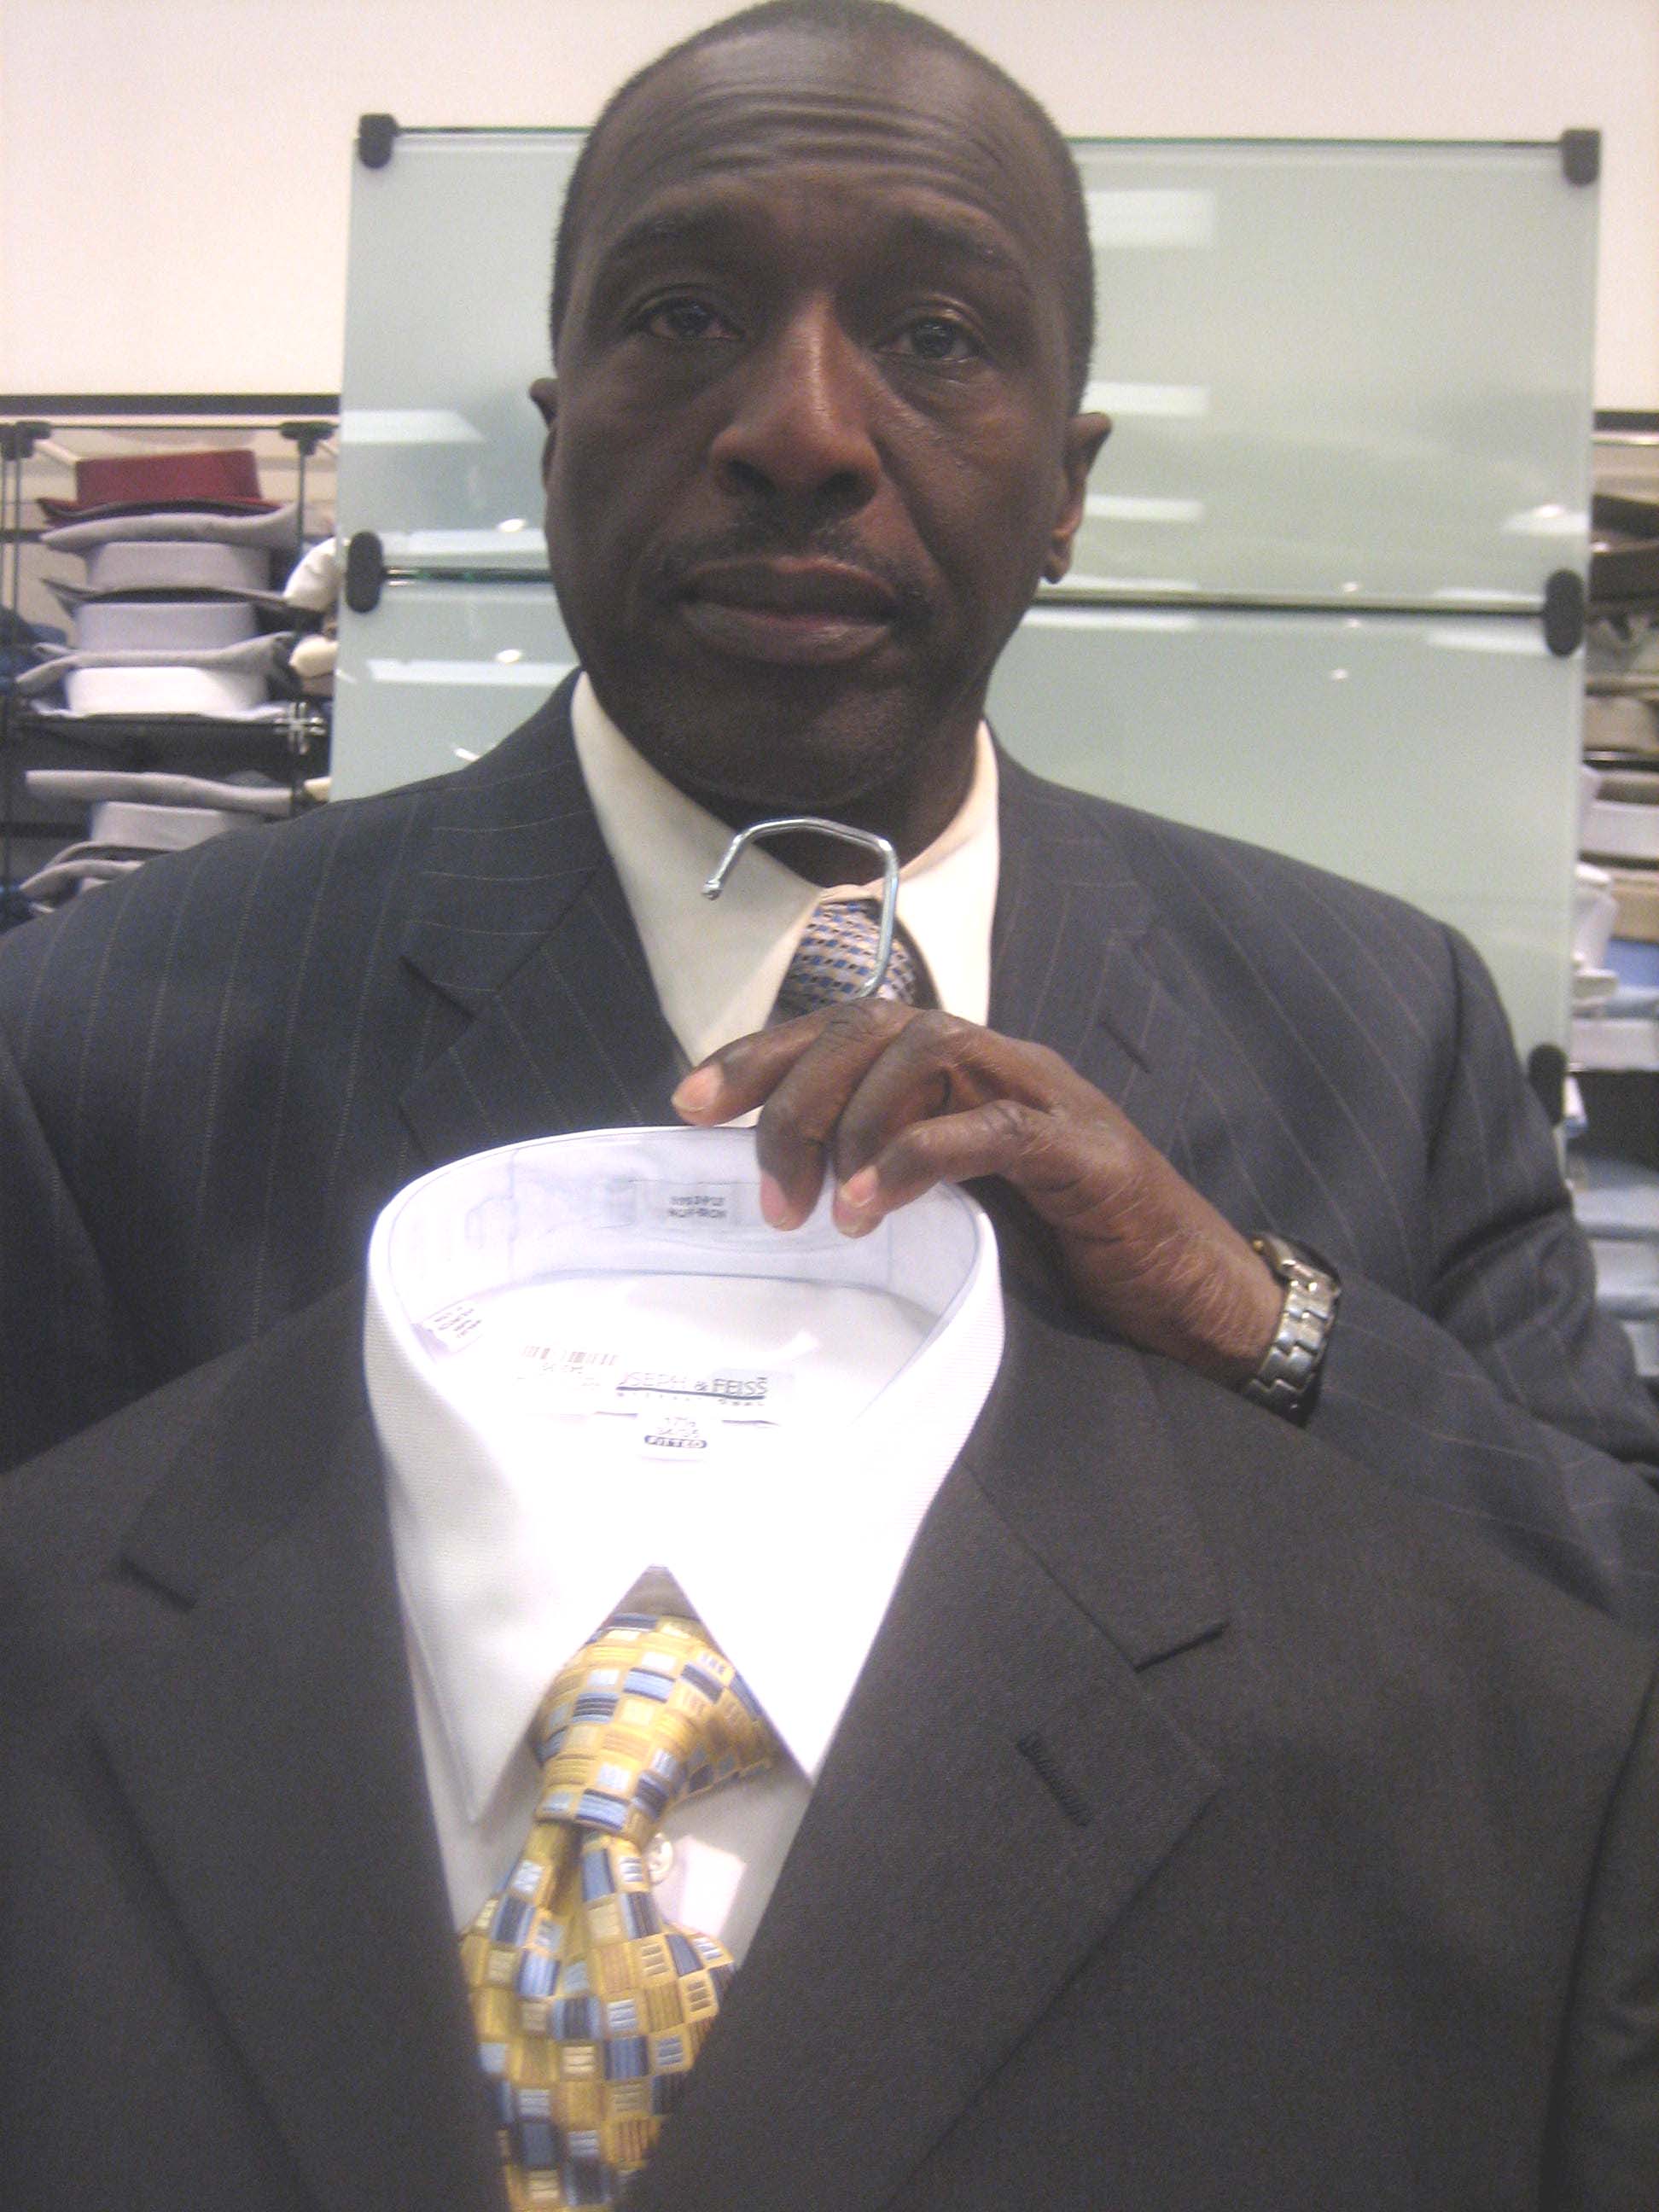 David Melton, assistant store manager at the Men's Warehouse in Silver Spring. Newsline photo by Alan J. McCombs